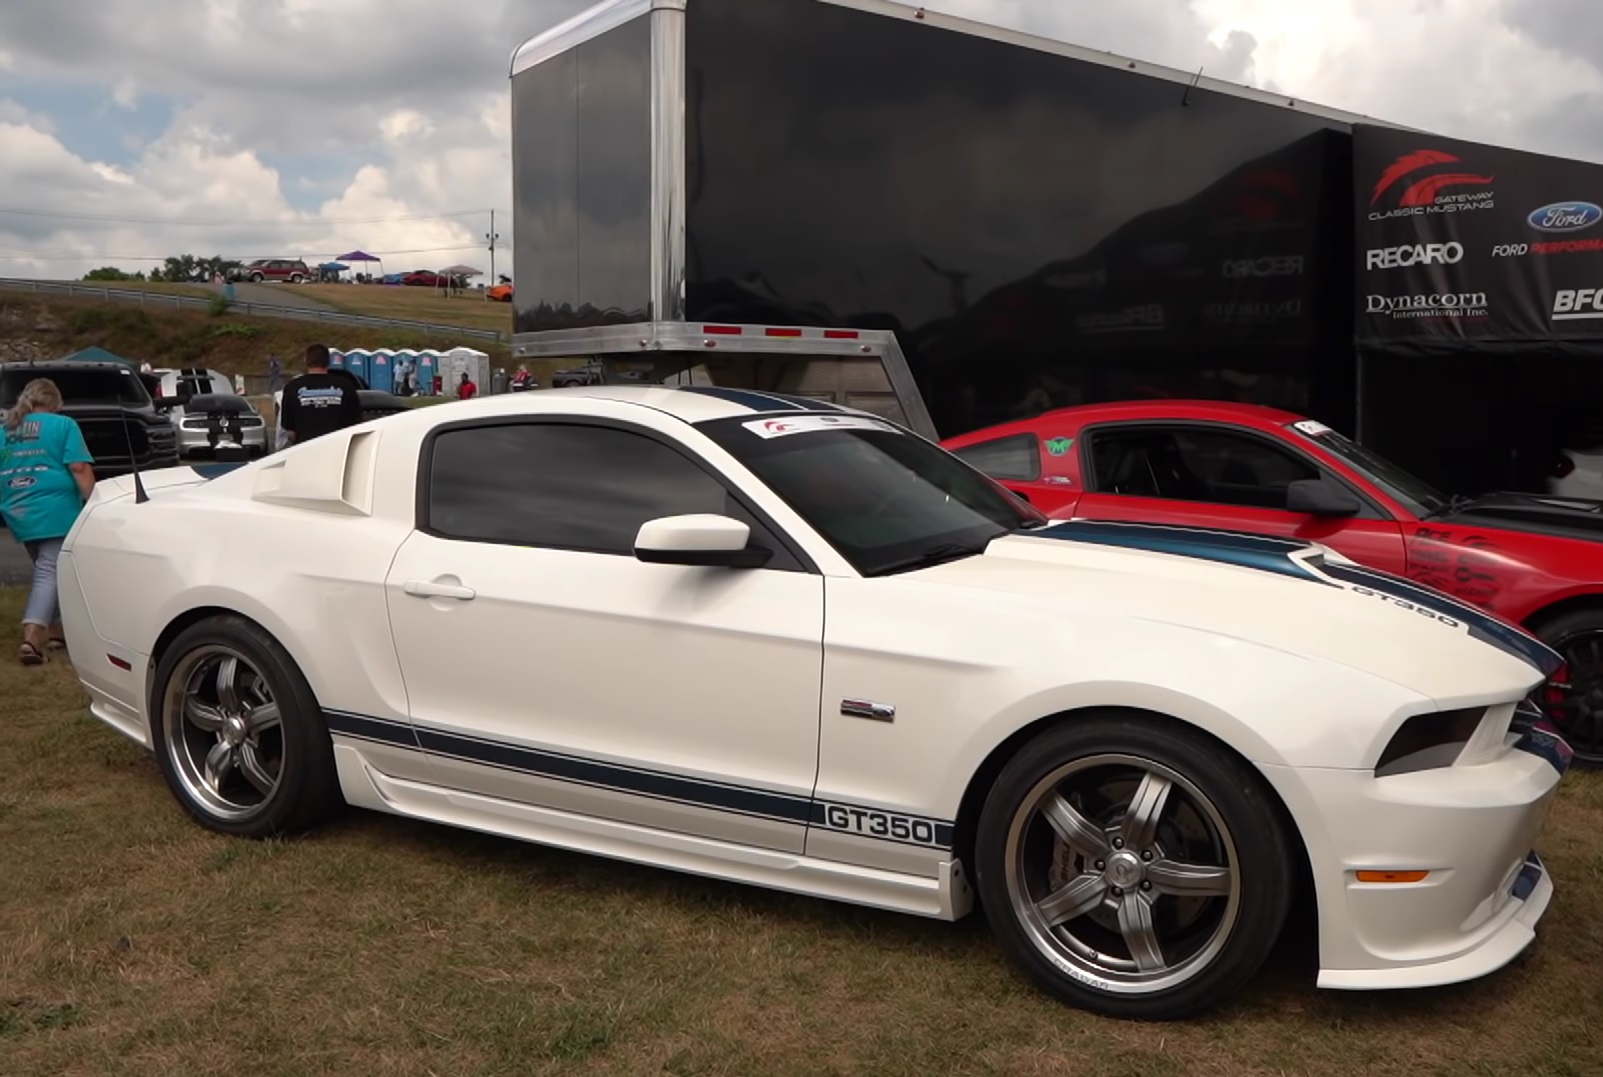 Video: Does The 2011 Ford Mustang Shelby GT350 Live Up To Its Iconic Name?